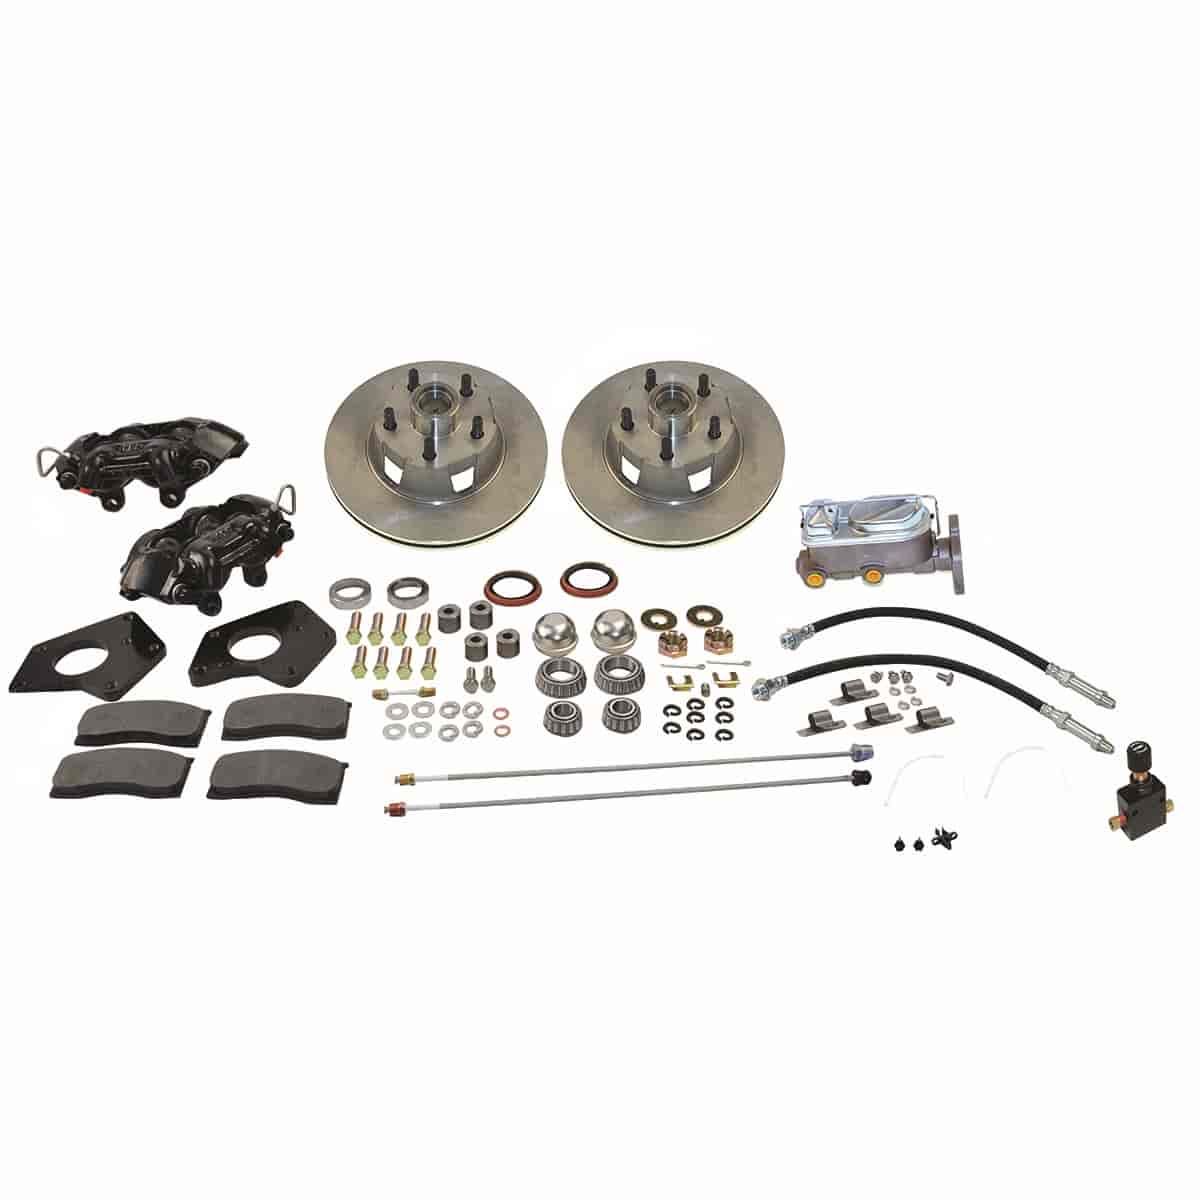 Front 4-Piston Drum to Disc Brake Conversion Kit See More Details for Applications